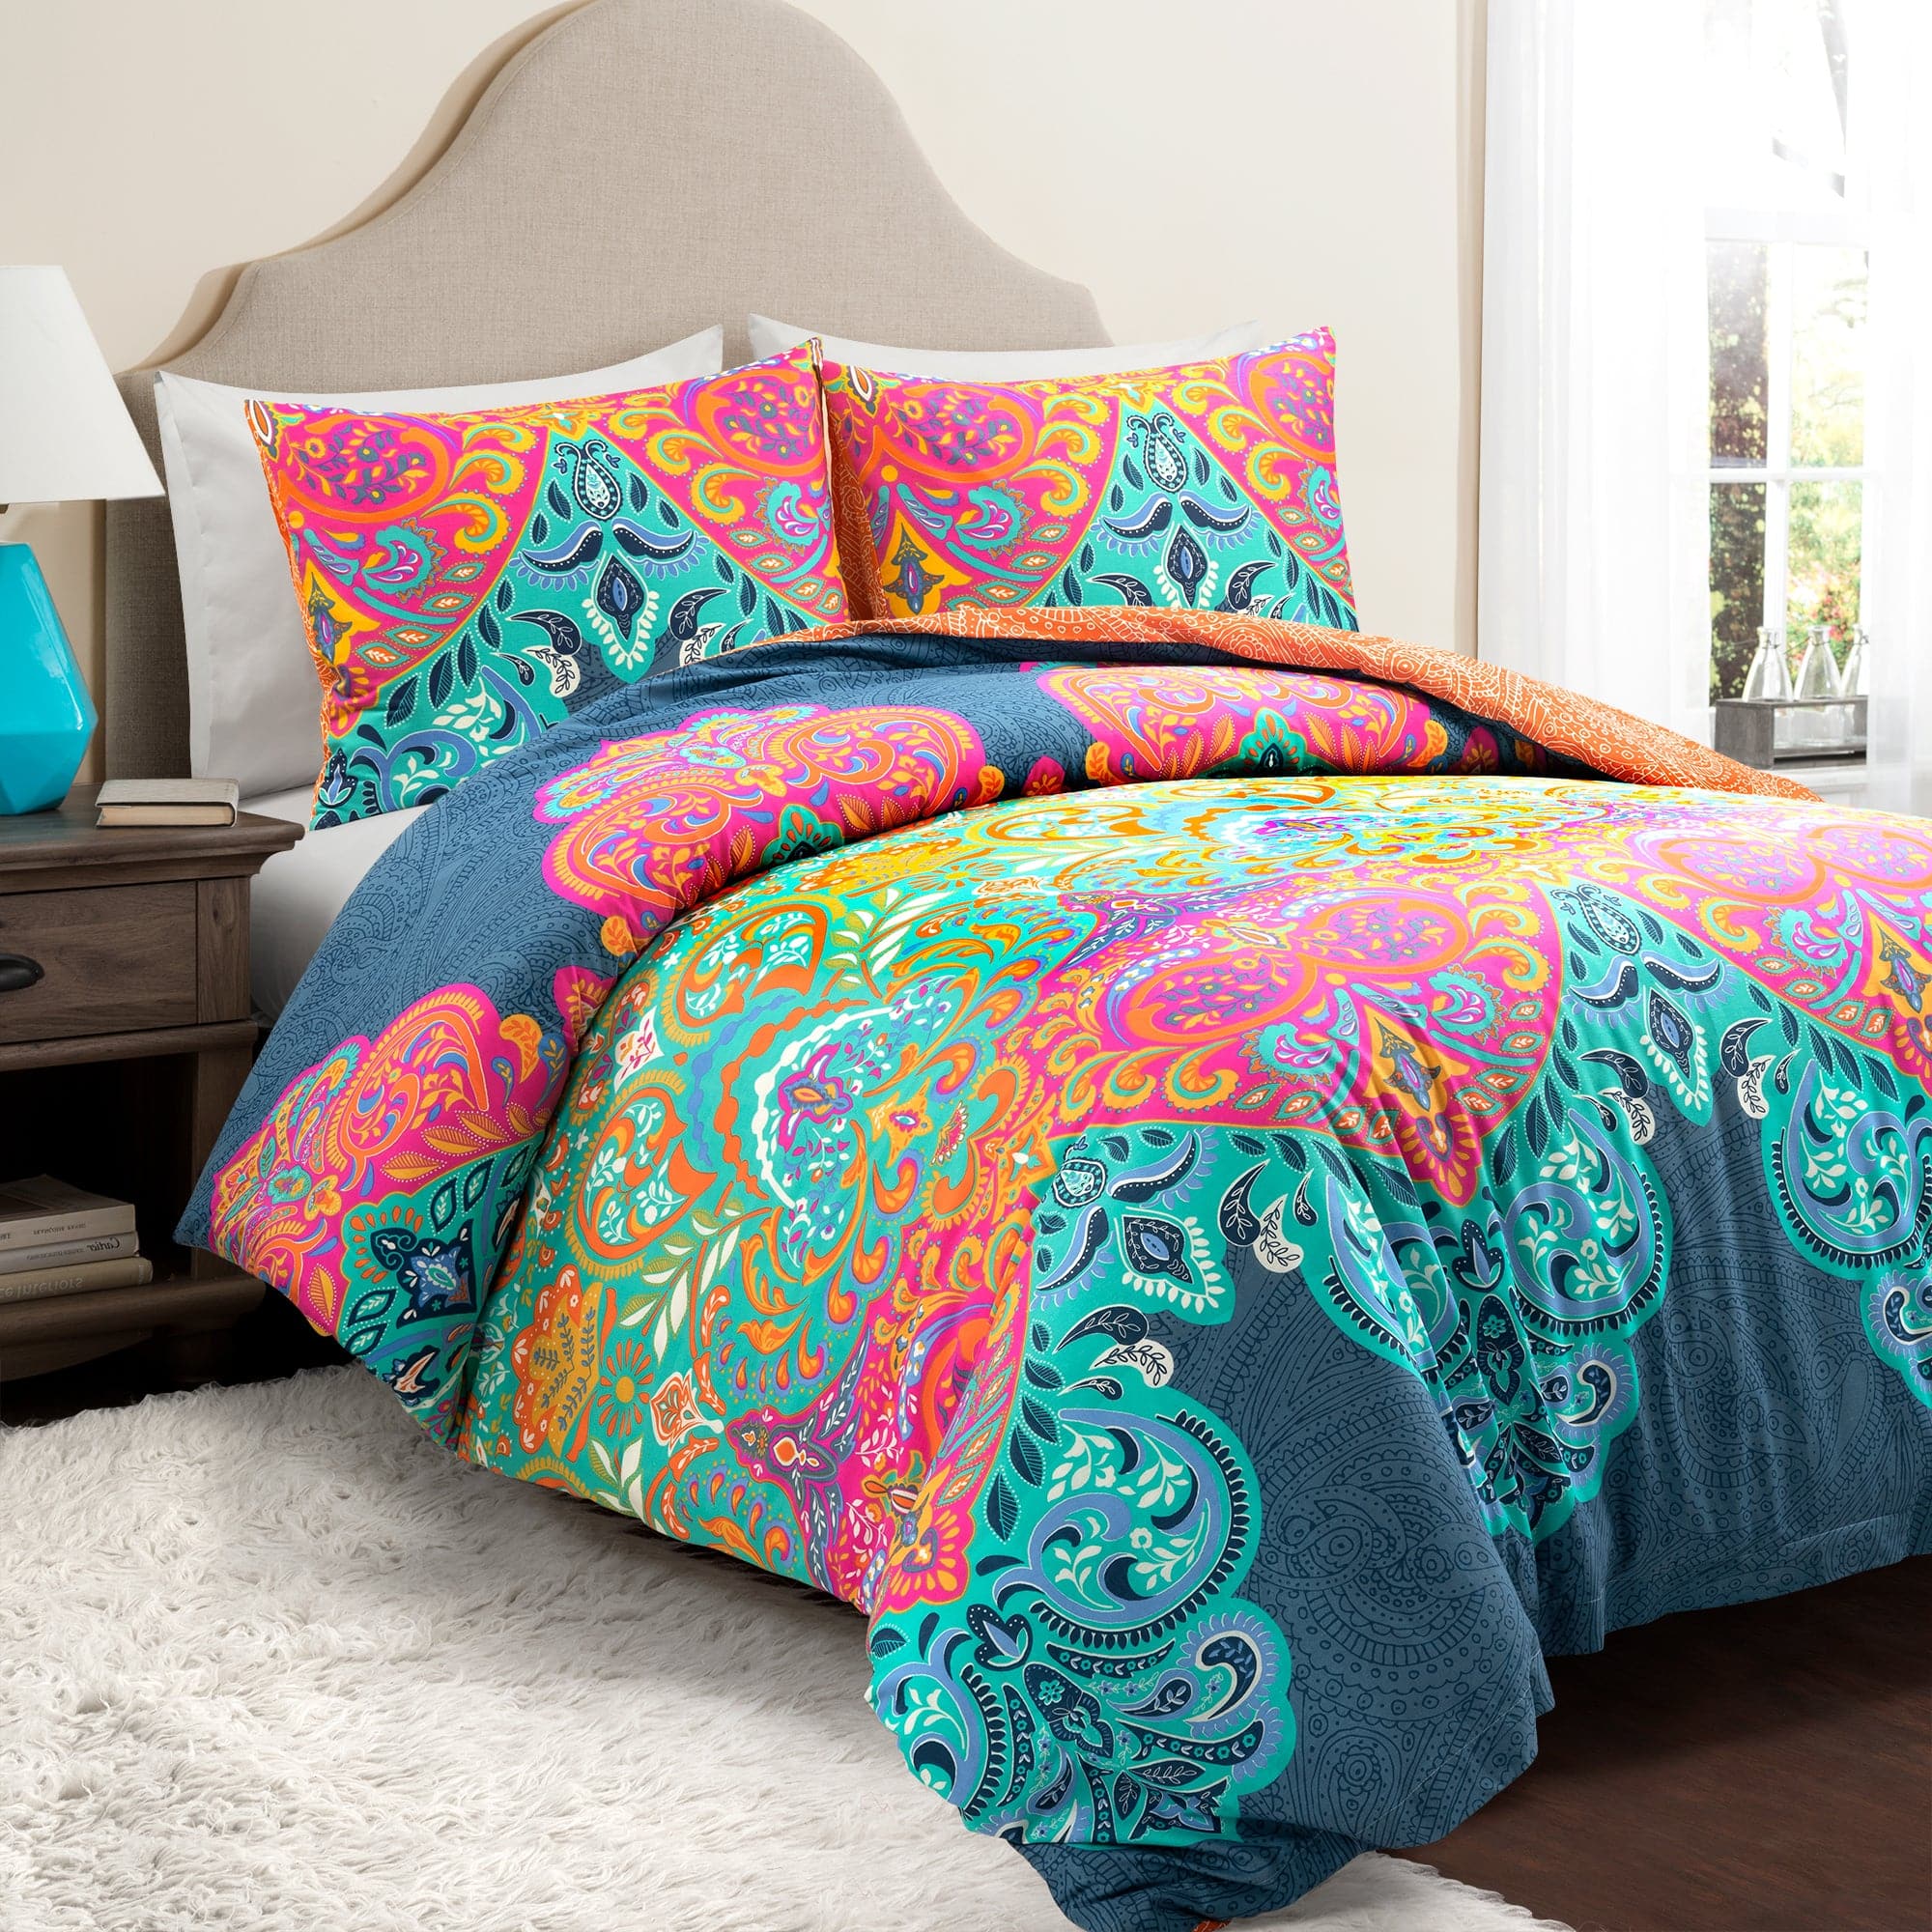 Cotton Duvet Covers: Soft Fabric and Enchanting Patterns